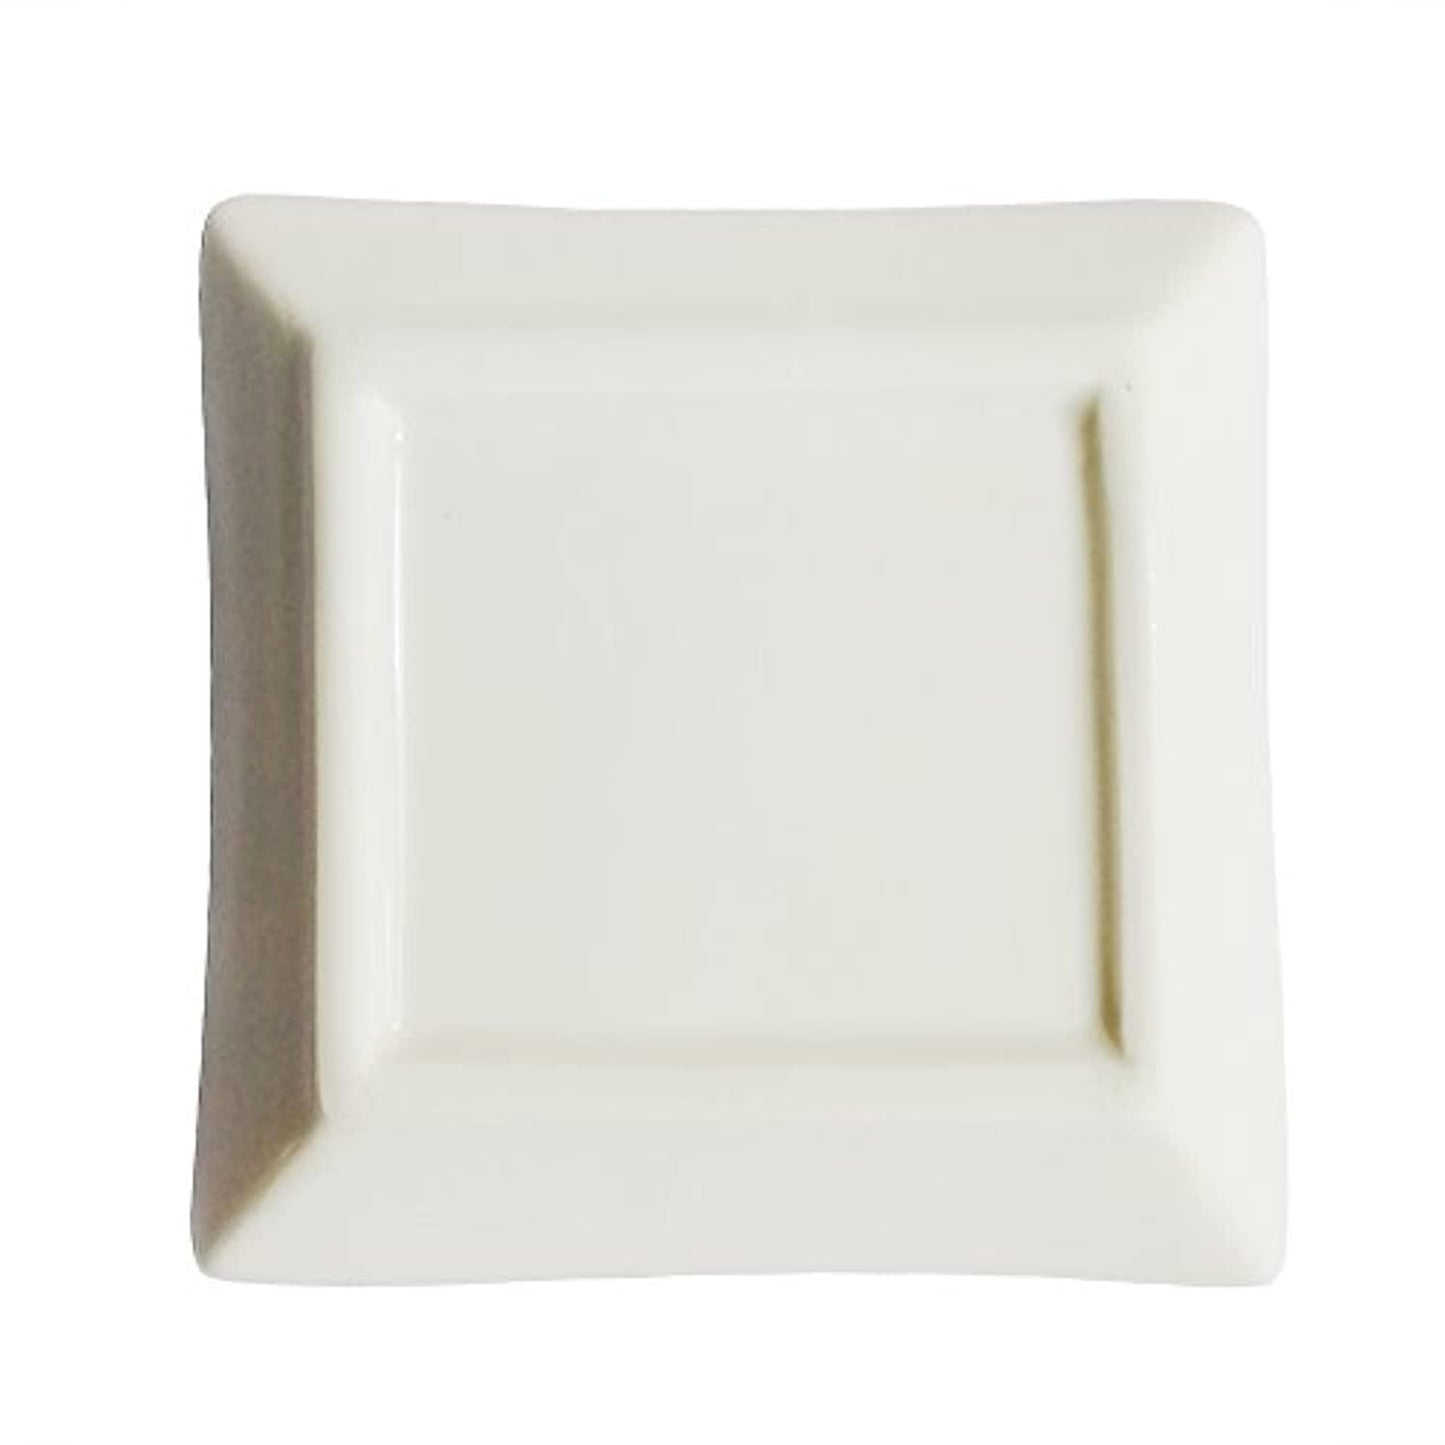 Mom Ceramic Ring Dish Mother's Day Gifts - TheGivenGet